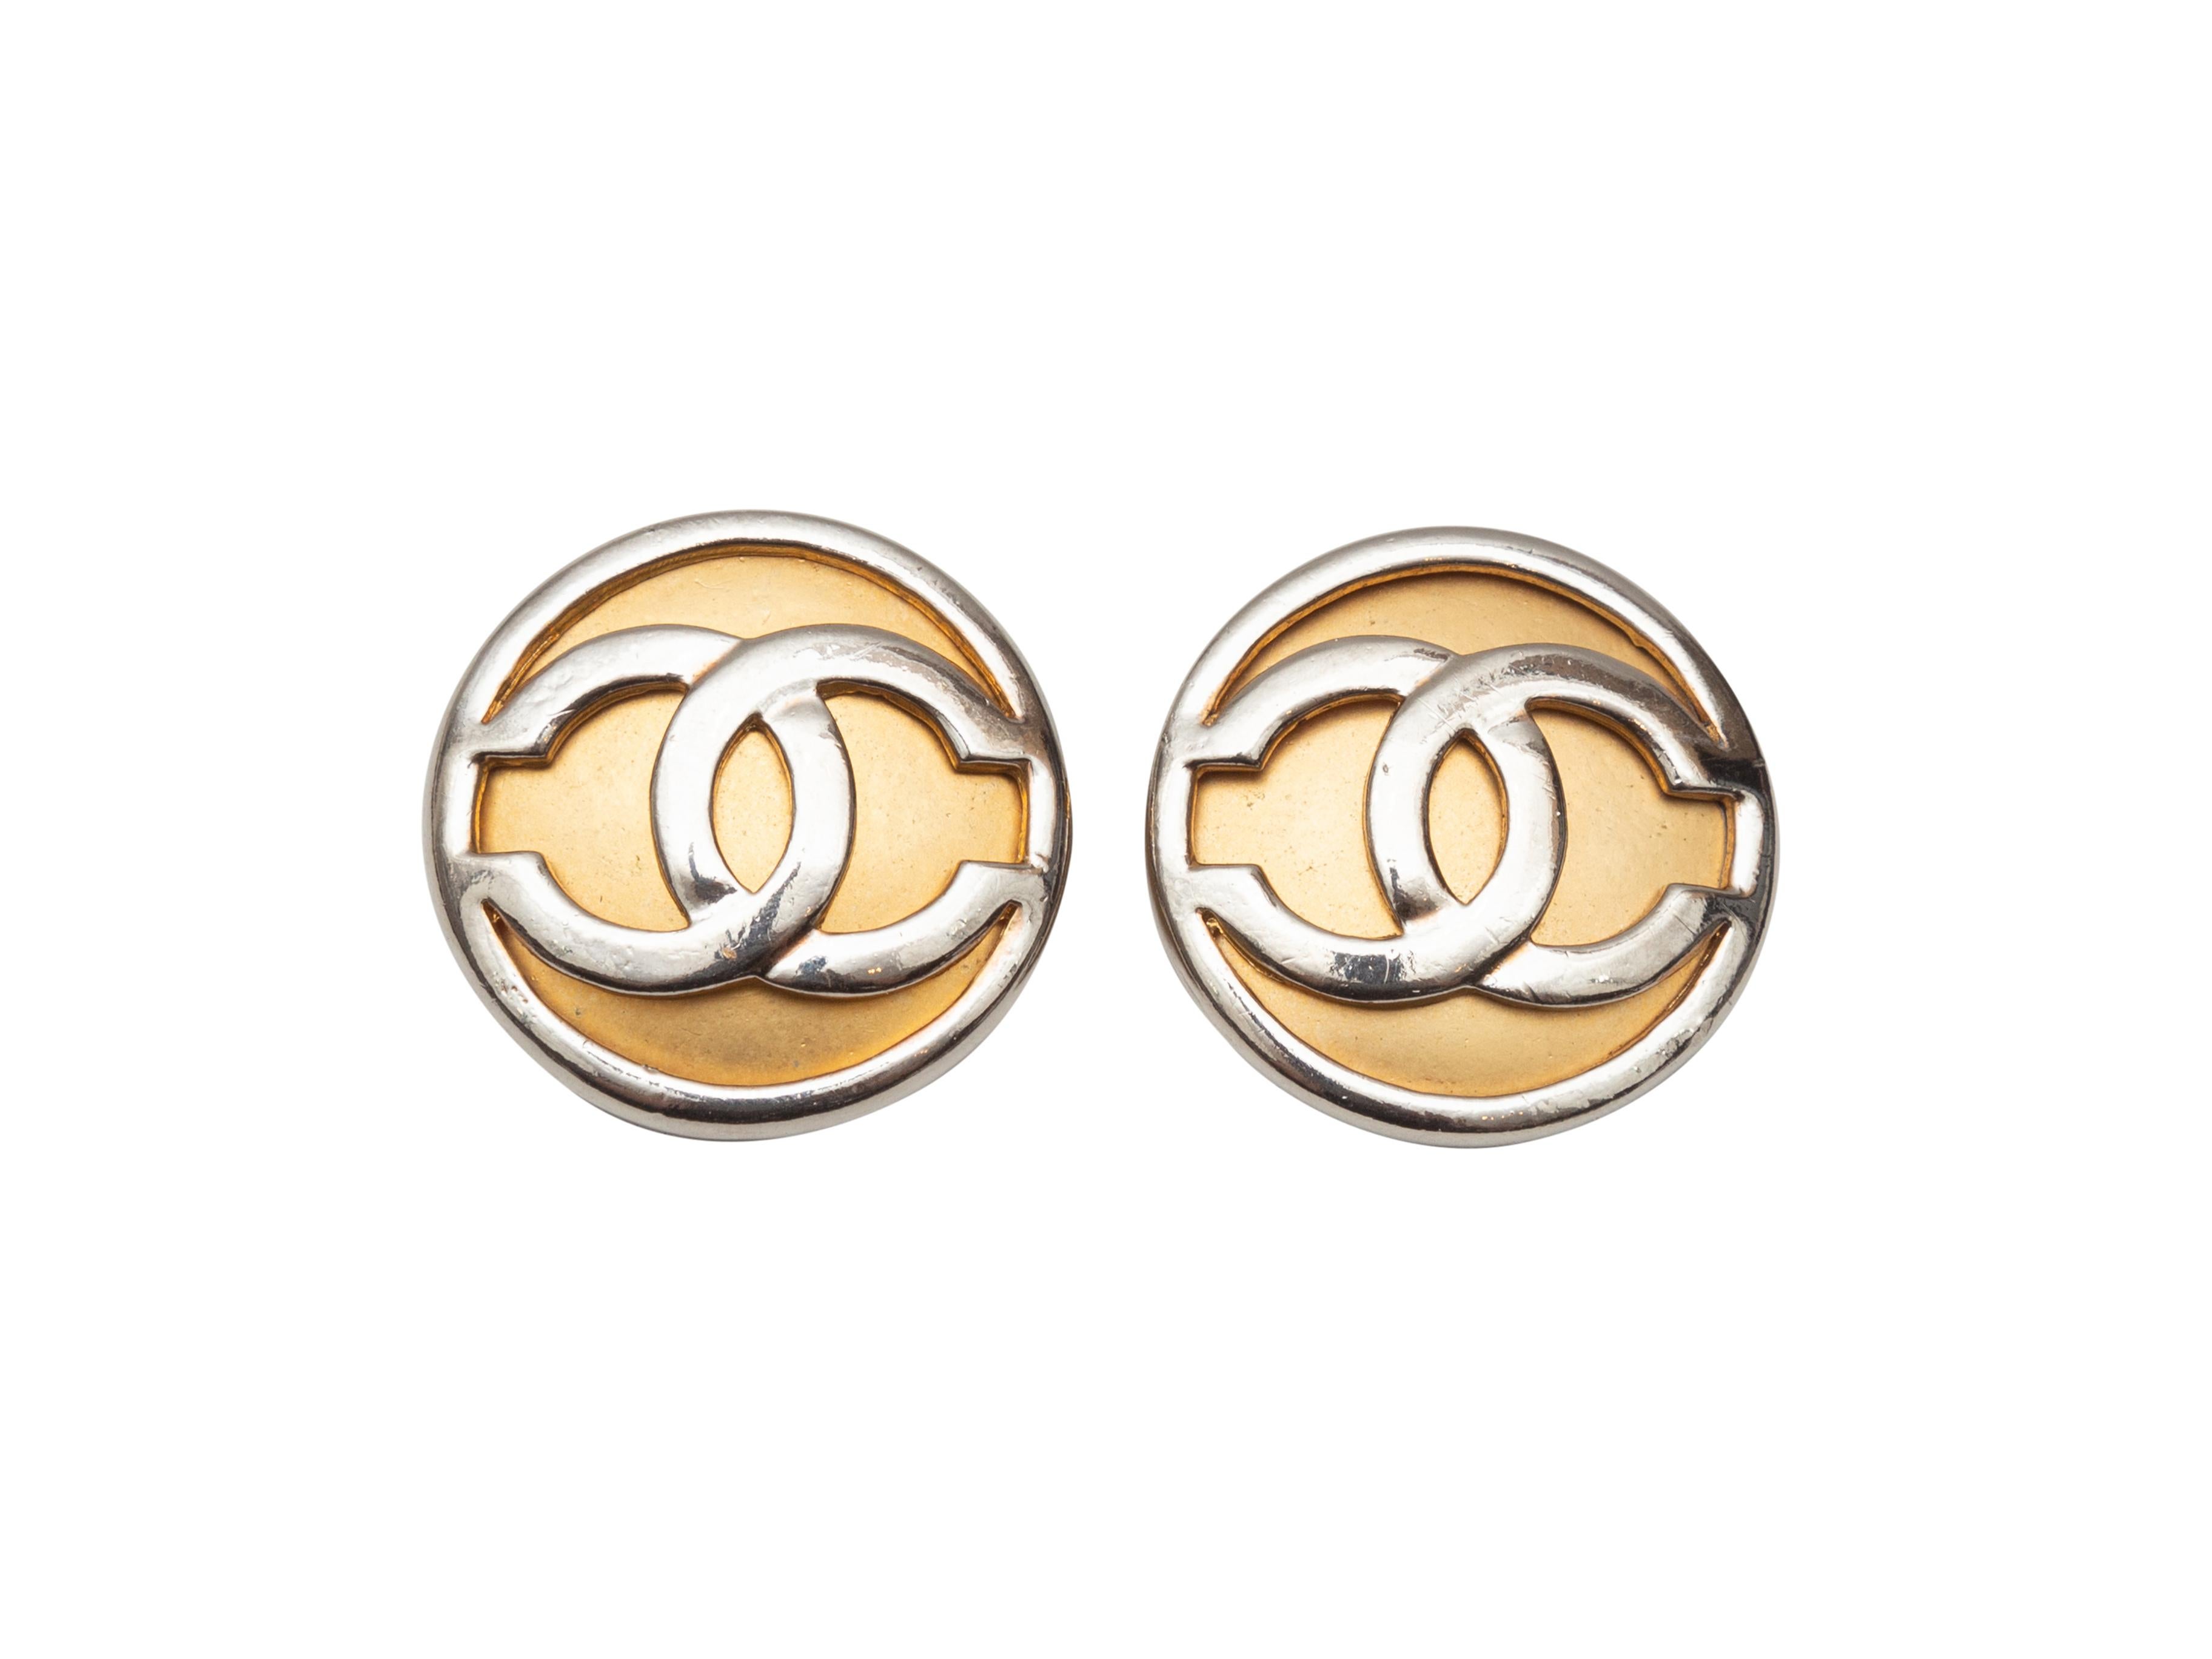 Product details: Vintage gold and silver metal CC clip-on earrings by Chanel. Circa 1980s. 1.25